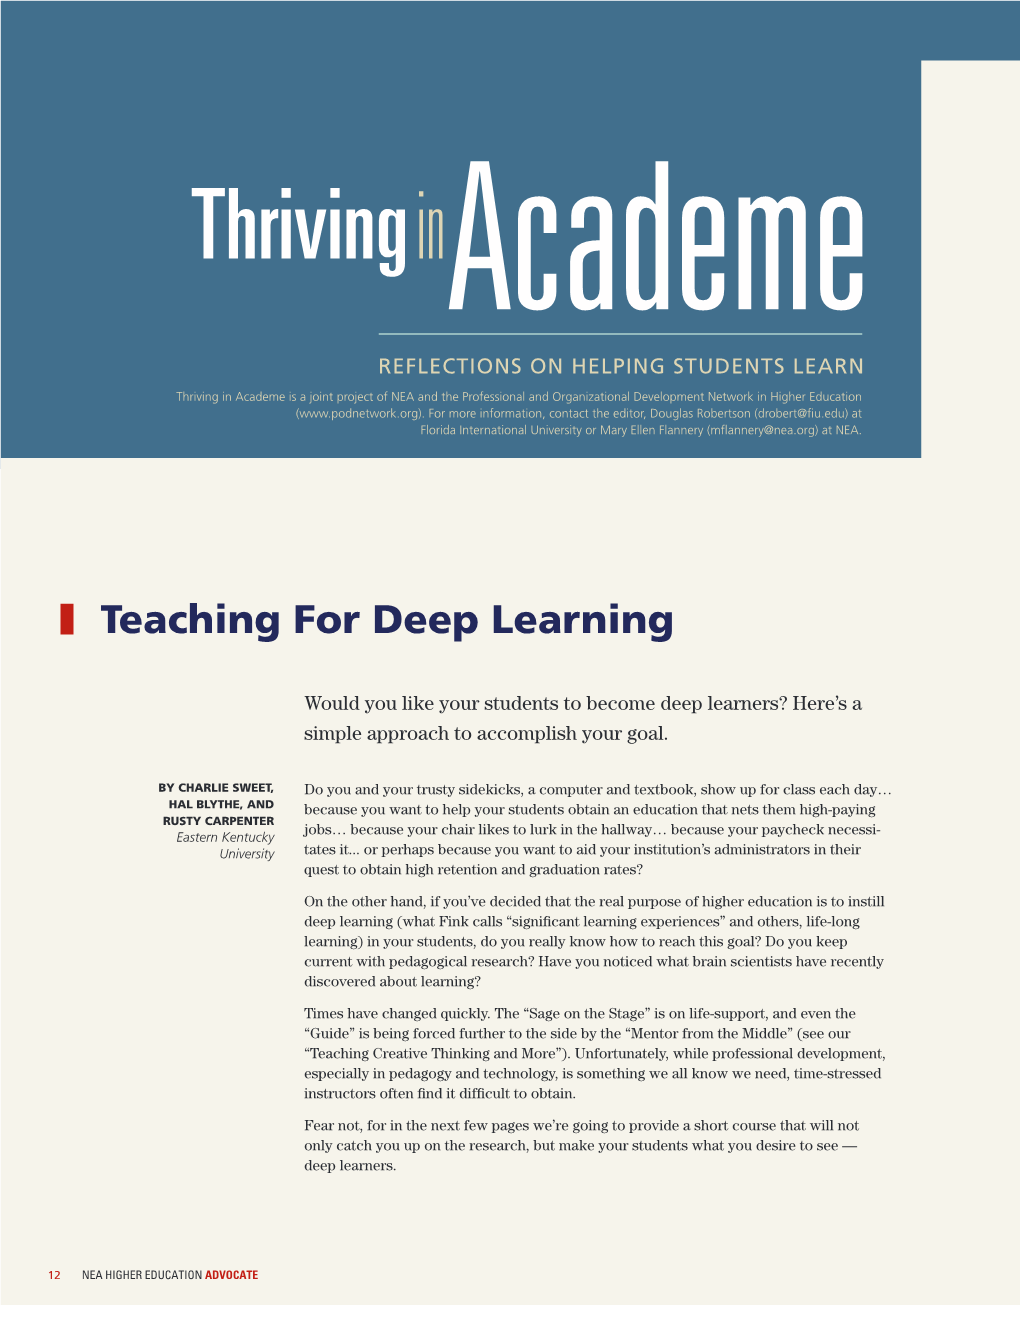 Teaching for Deep Learning